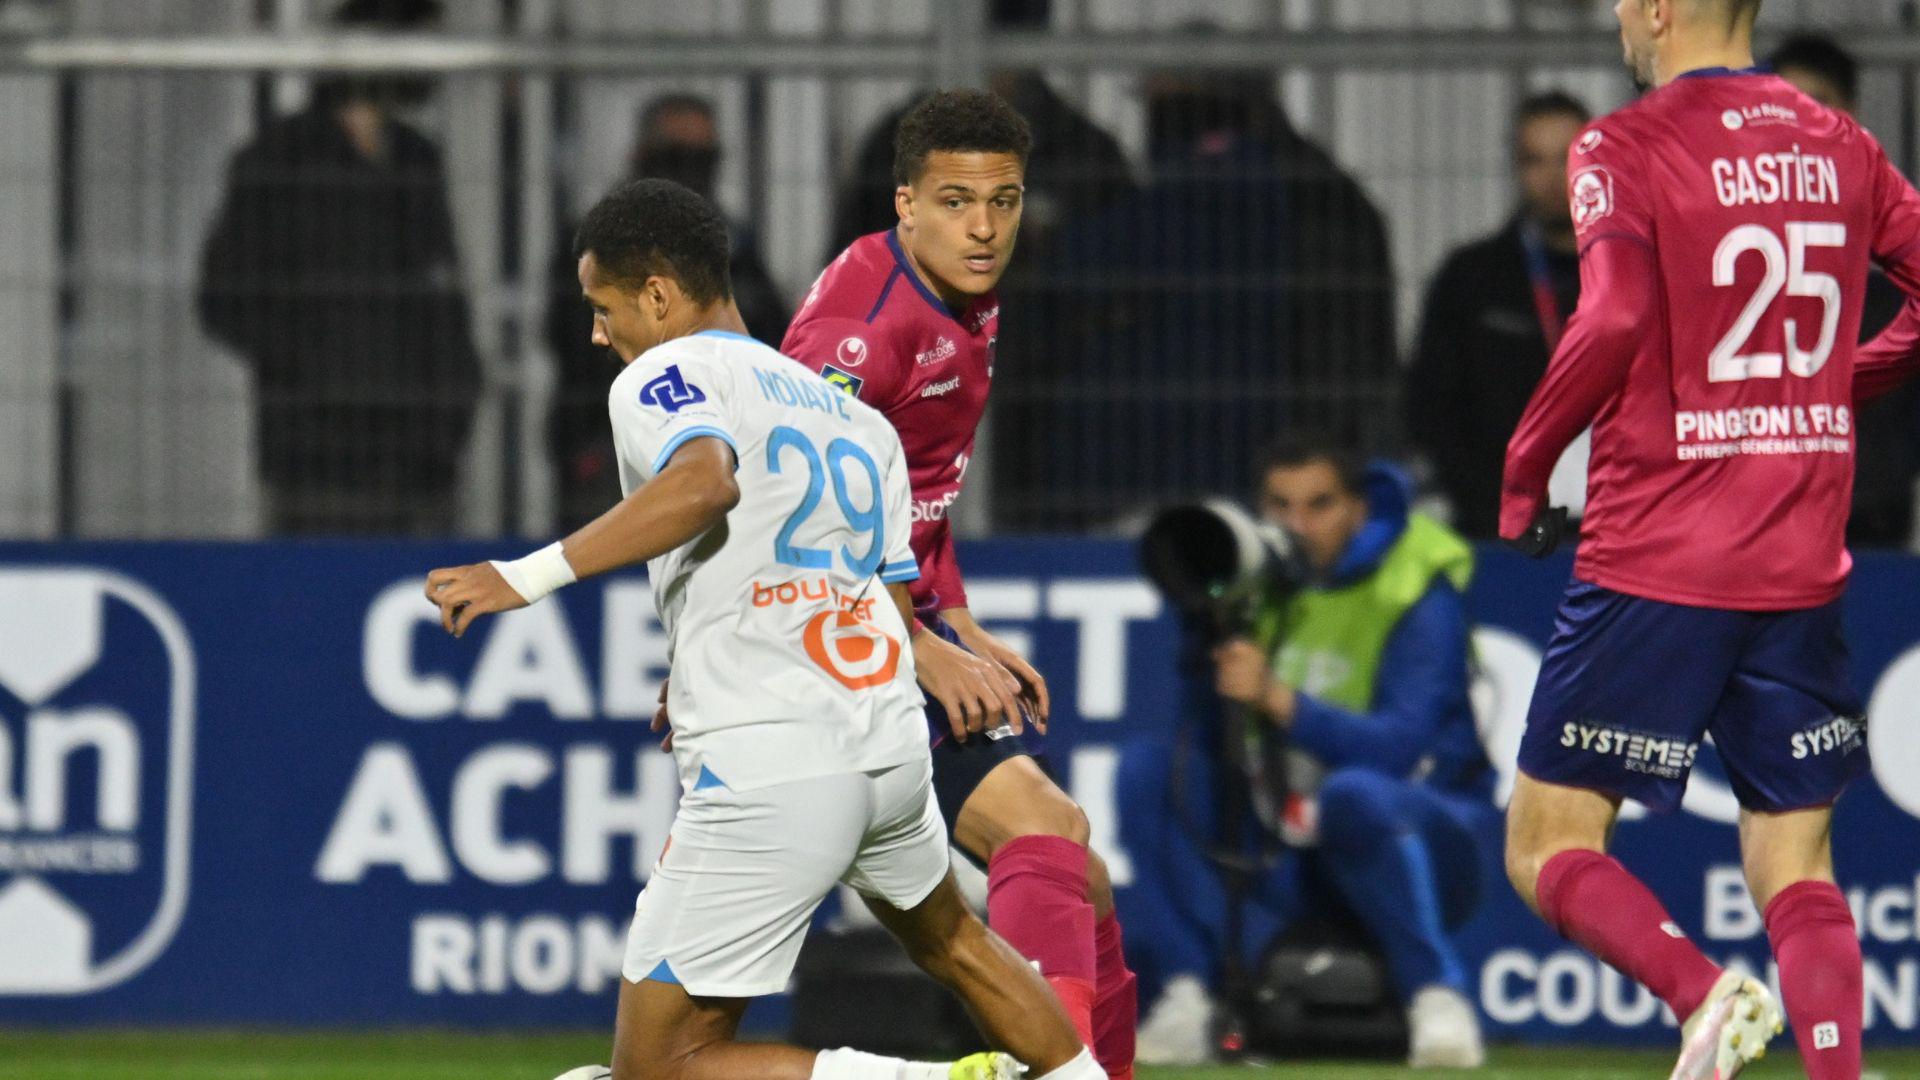 VIDEO | Ligue 1 Highlights: Clermont Foot vs Marseille